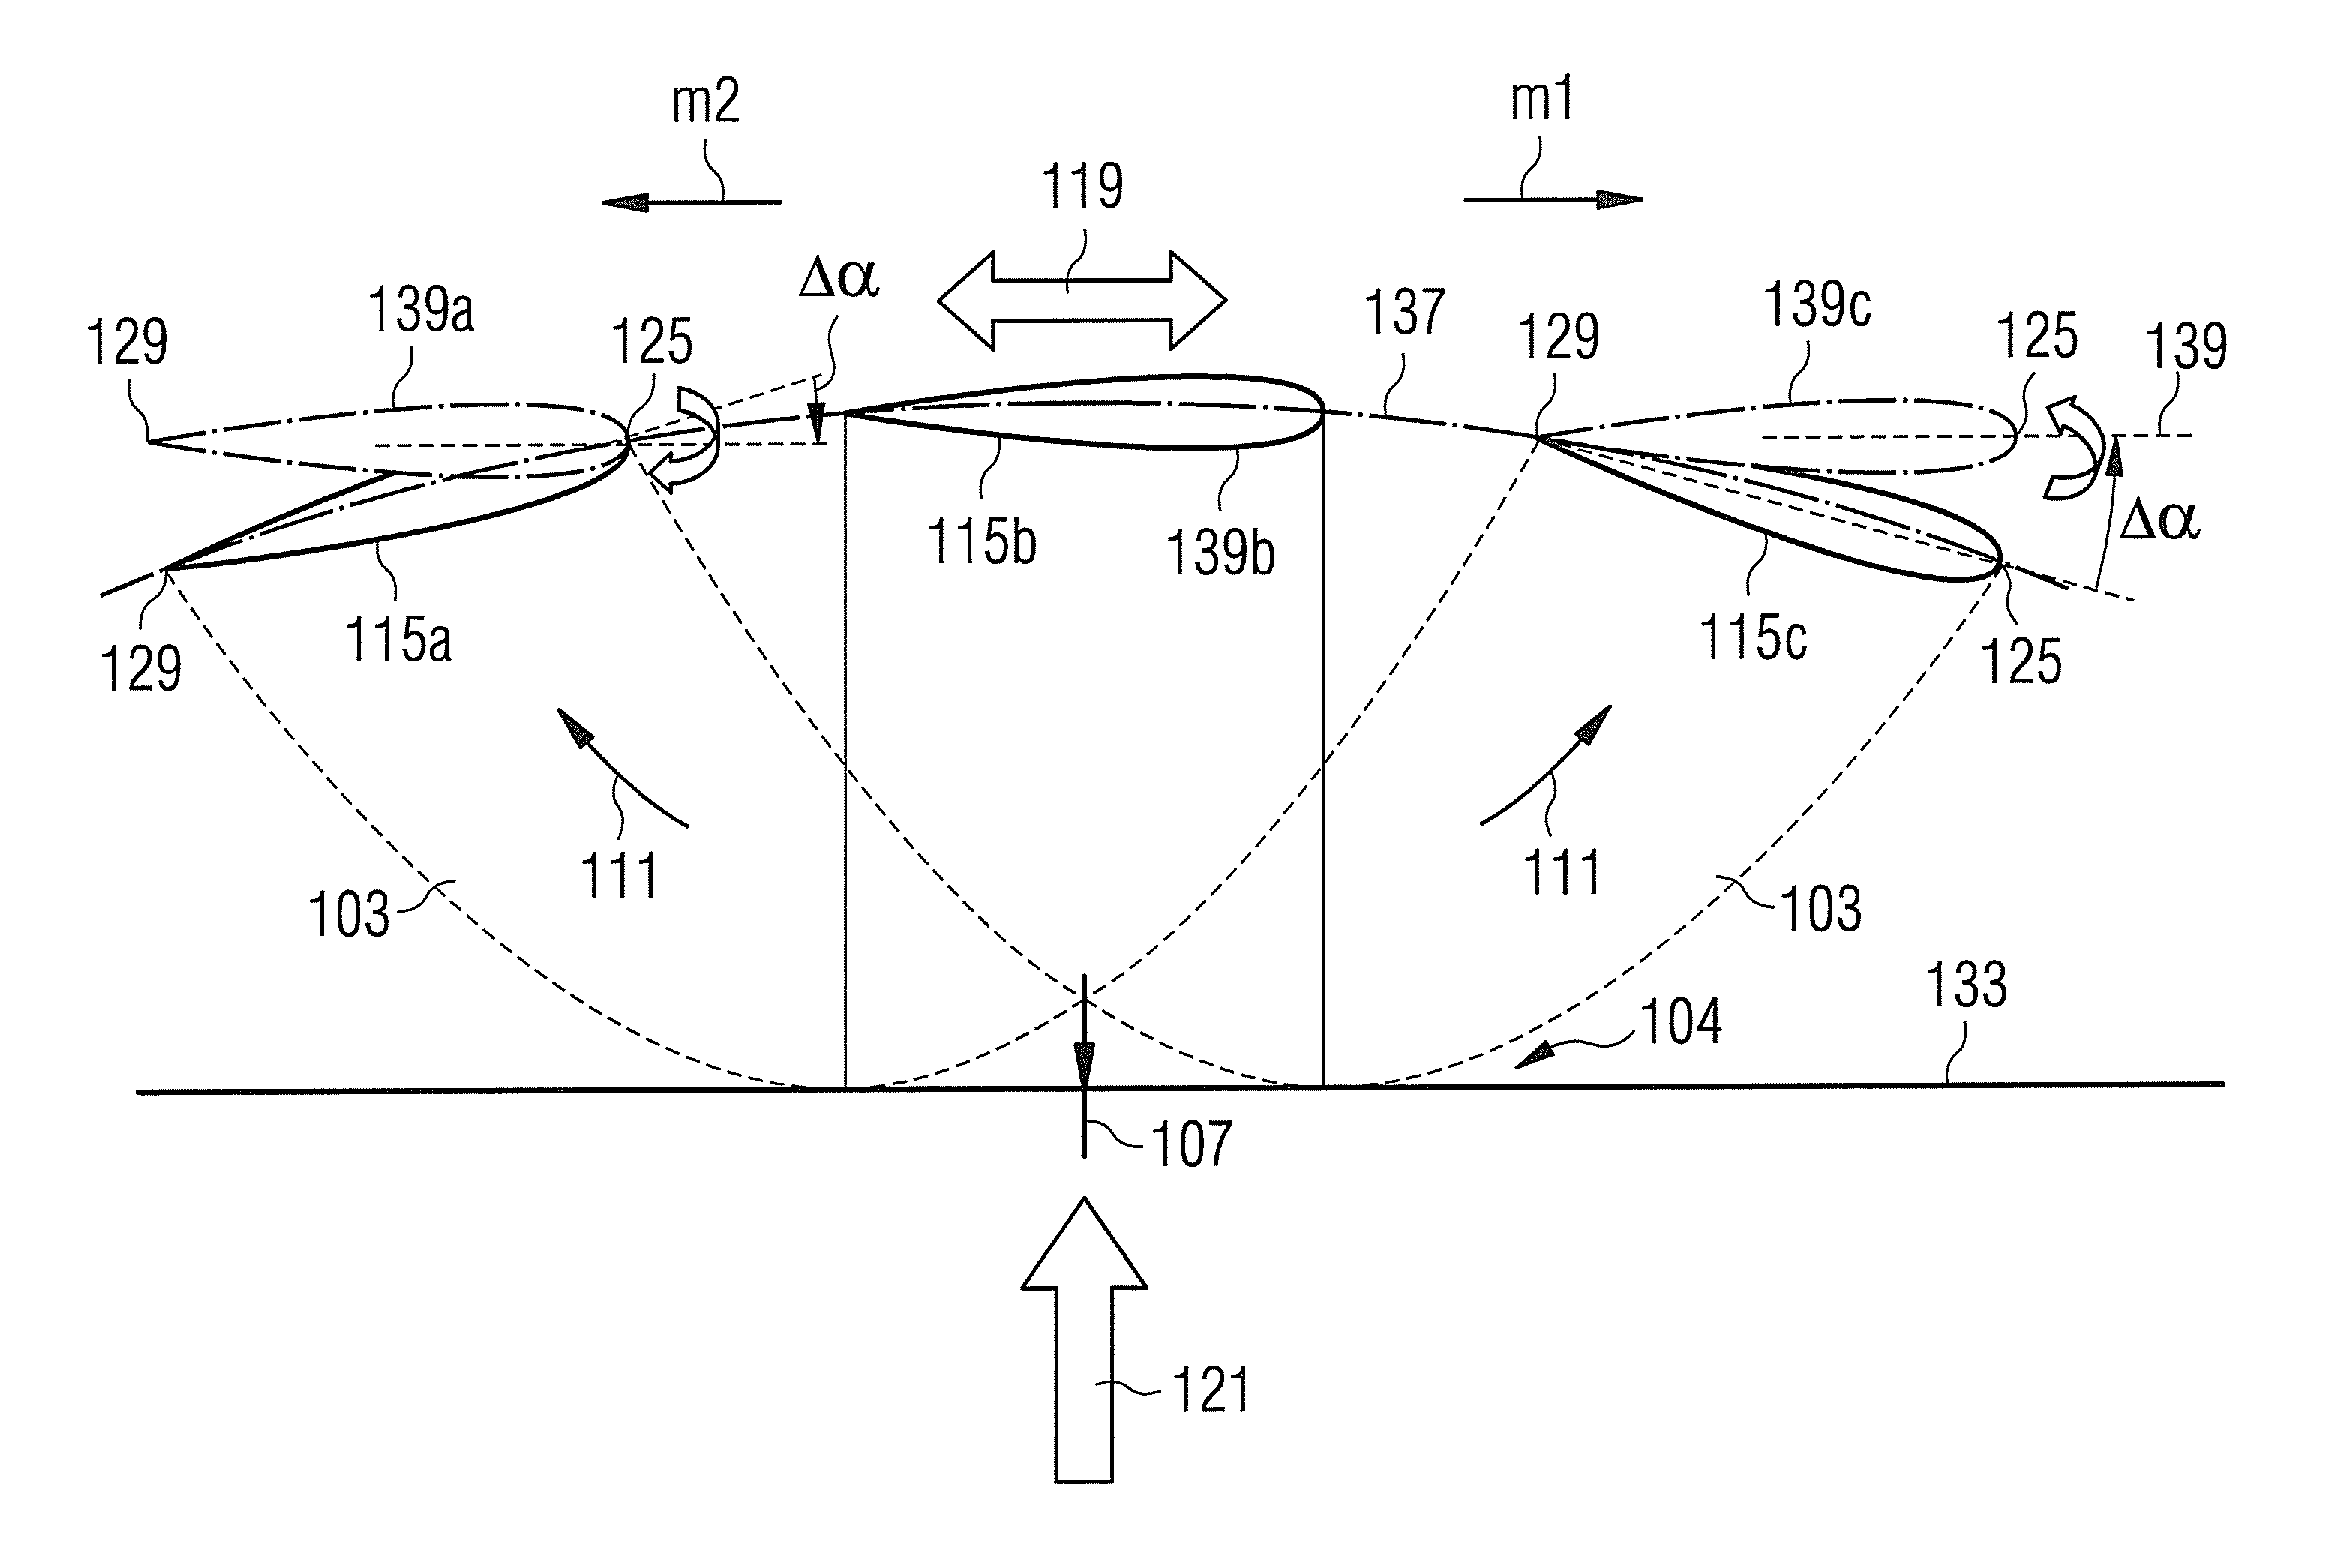 Method and controller for generating a blade pitch angle control signal and wind turbine comprising the controller